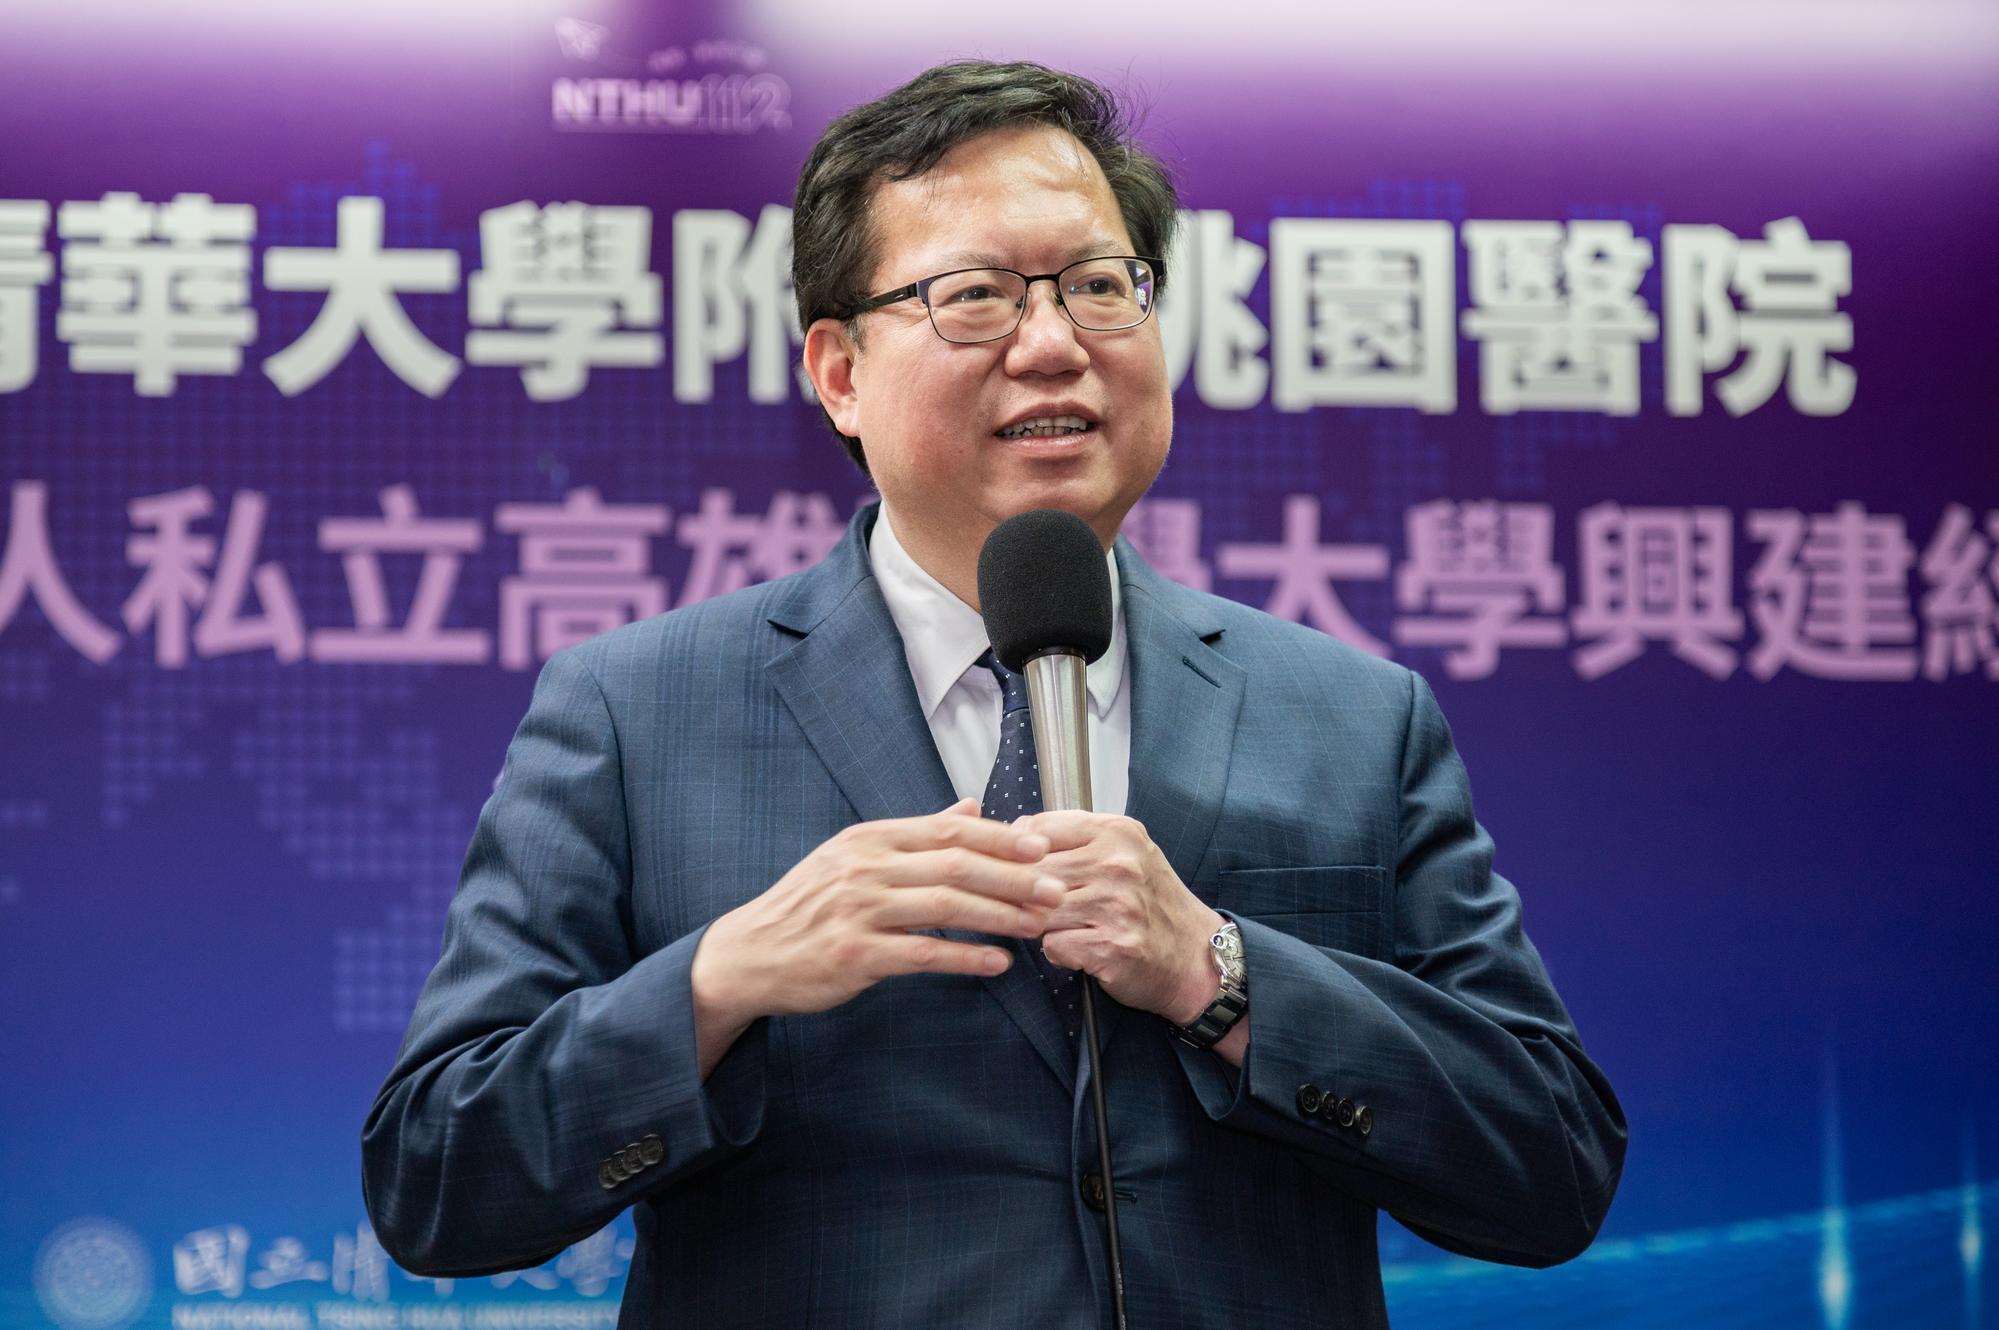 The BOT project was initiated by Deputy Premier Wen-tsang Cheng (鄭文燦) during his tenure as the mayor of Taoyuan City.